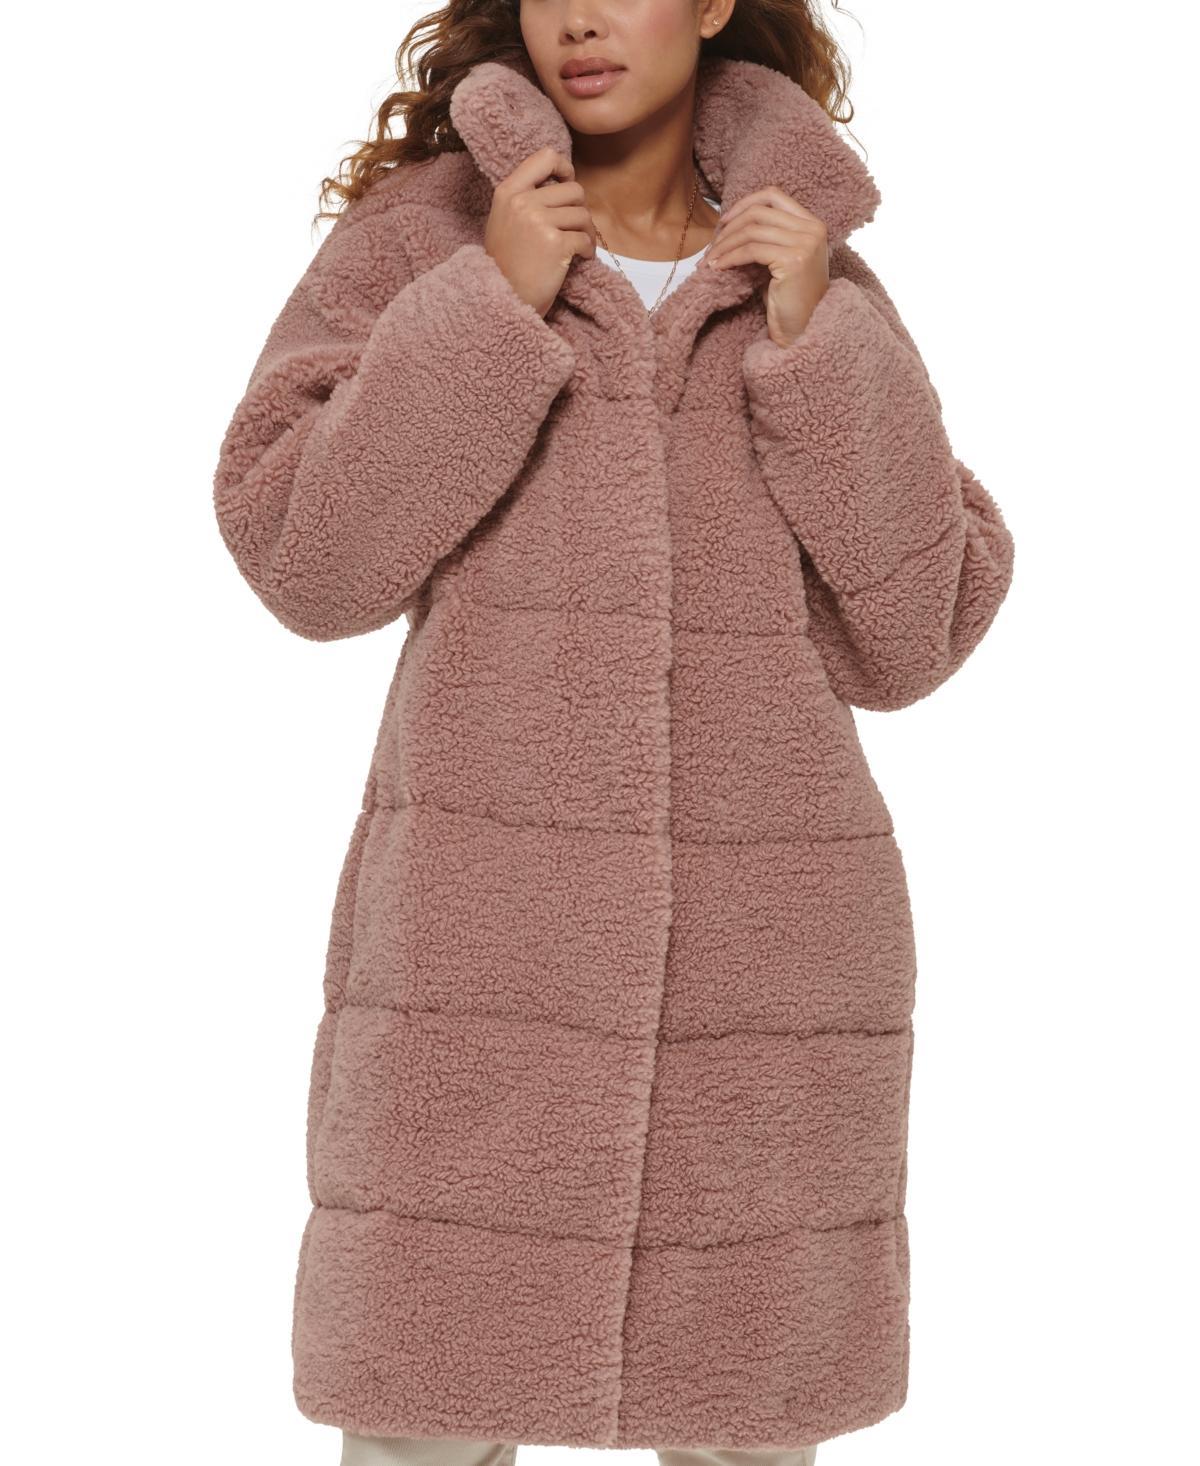 levis Quilted Fleece Long Teddy Coat Product Image